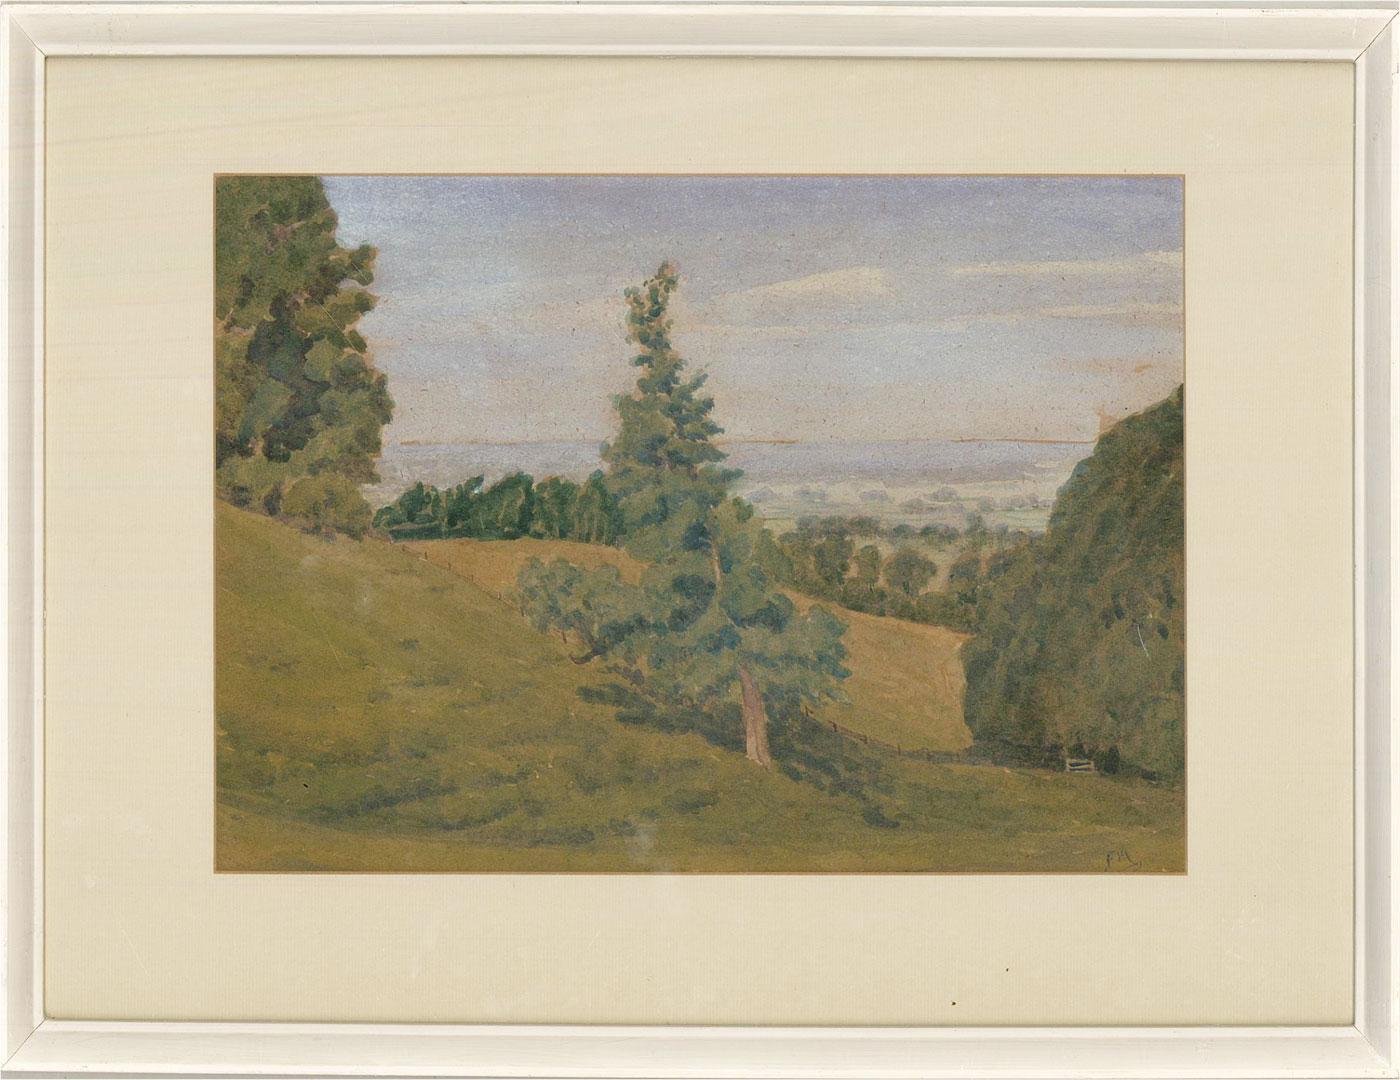 A fine panoramic view of a Summer landscape. The beautiful rolling green hills stretch off into the distance with verdant woodland scattering the meadows. The artist has initialed to the lower right and the painting has been presented in a